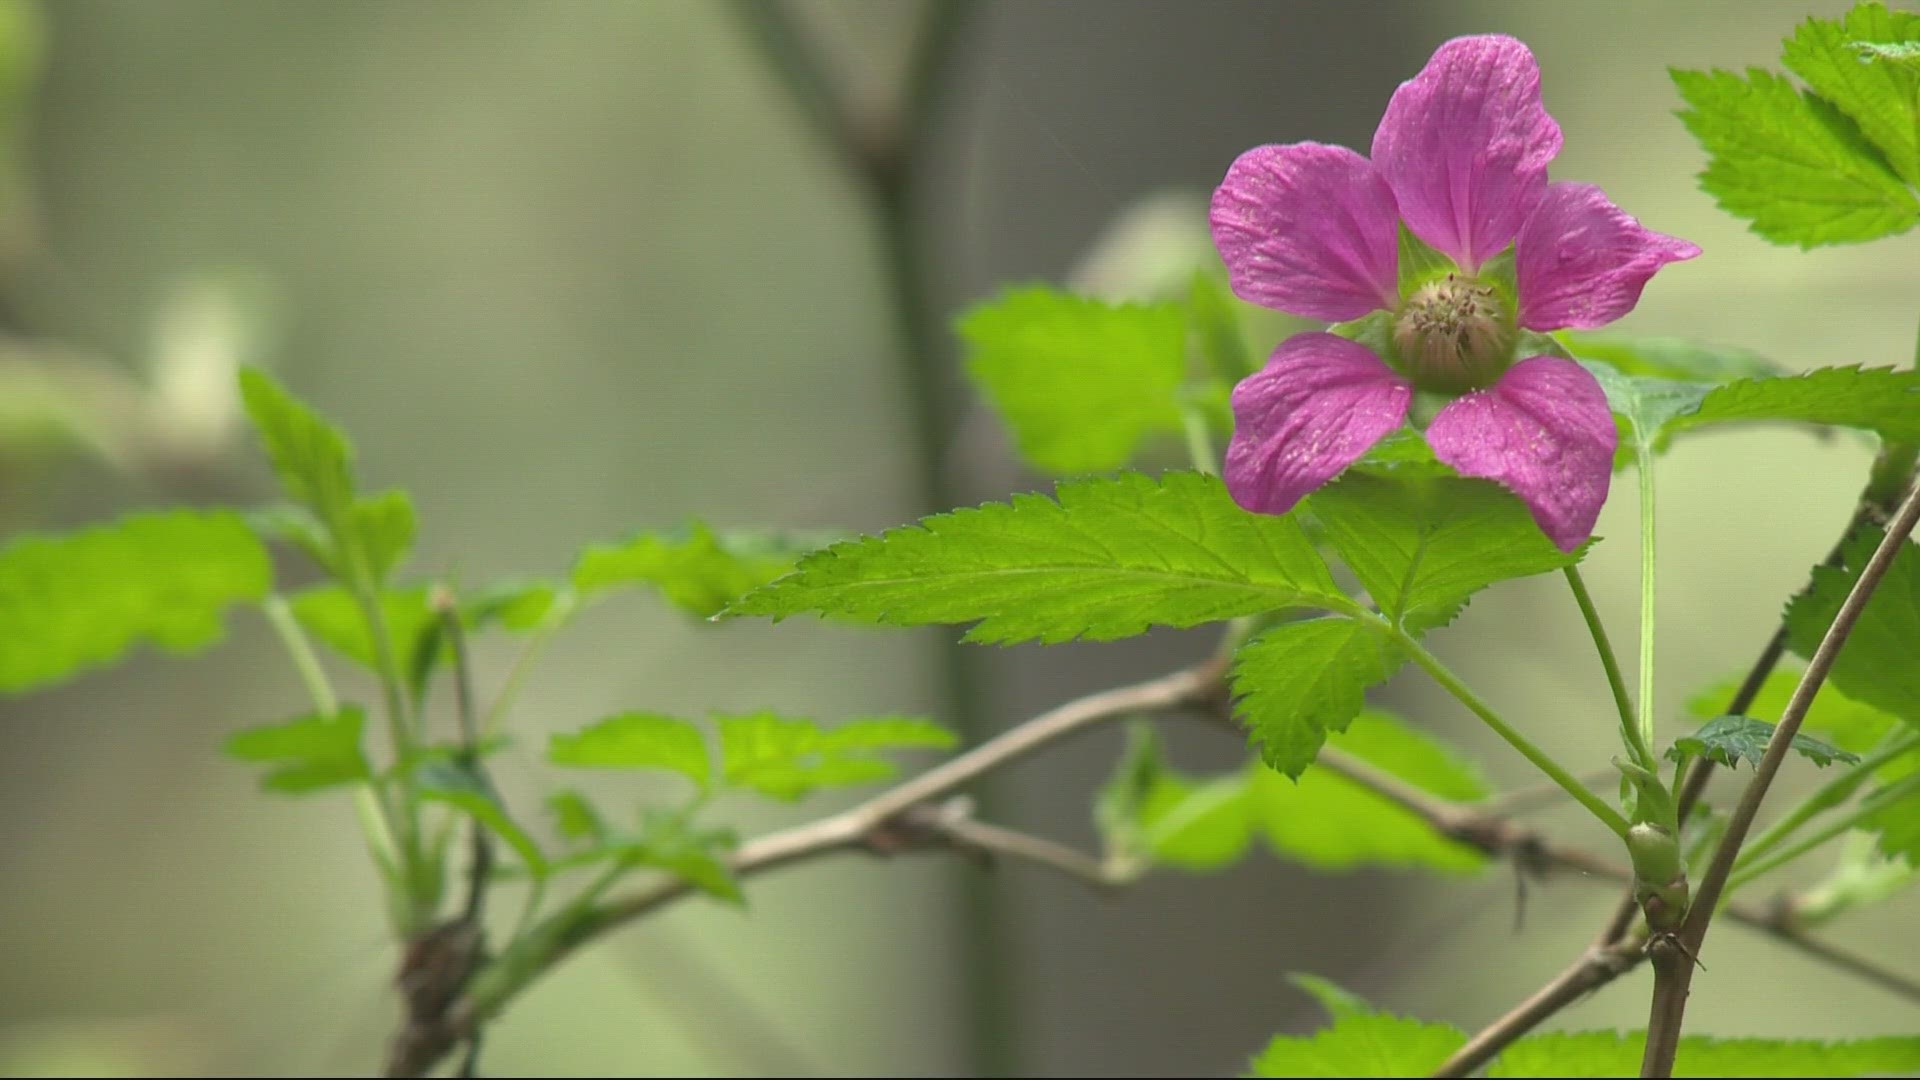 In this week's Let's Get Out There, we head to Silver Falls State Park for a preview of the birding and wildflower festival ahead of Mother's Day.